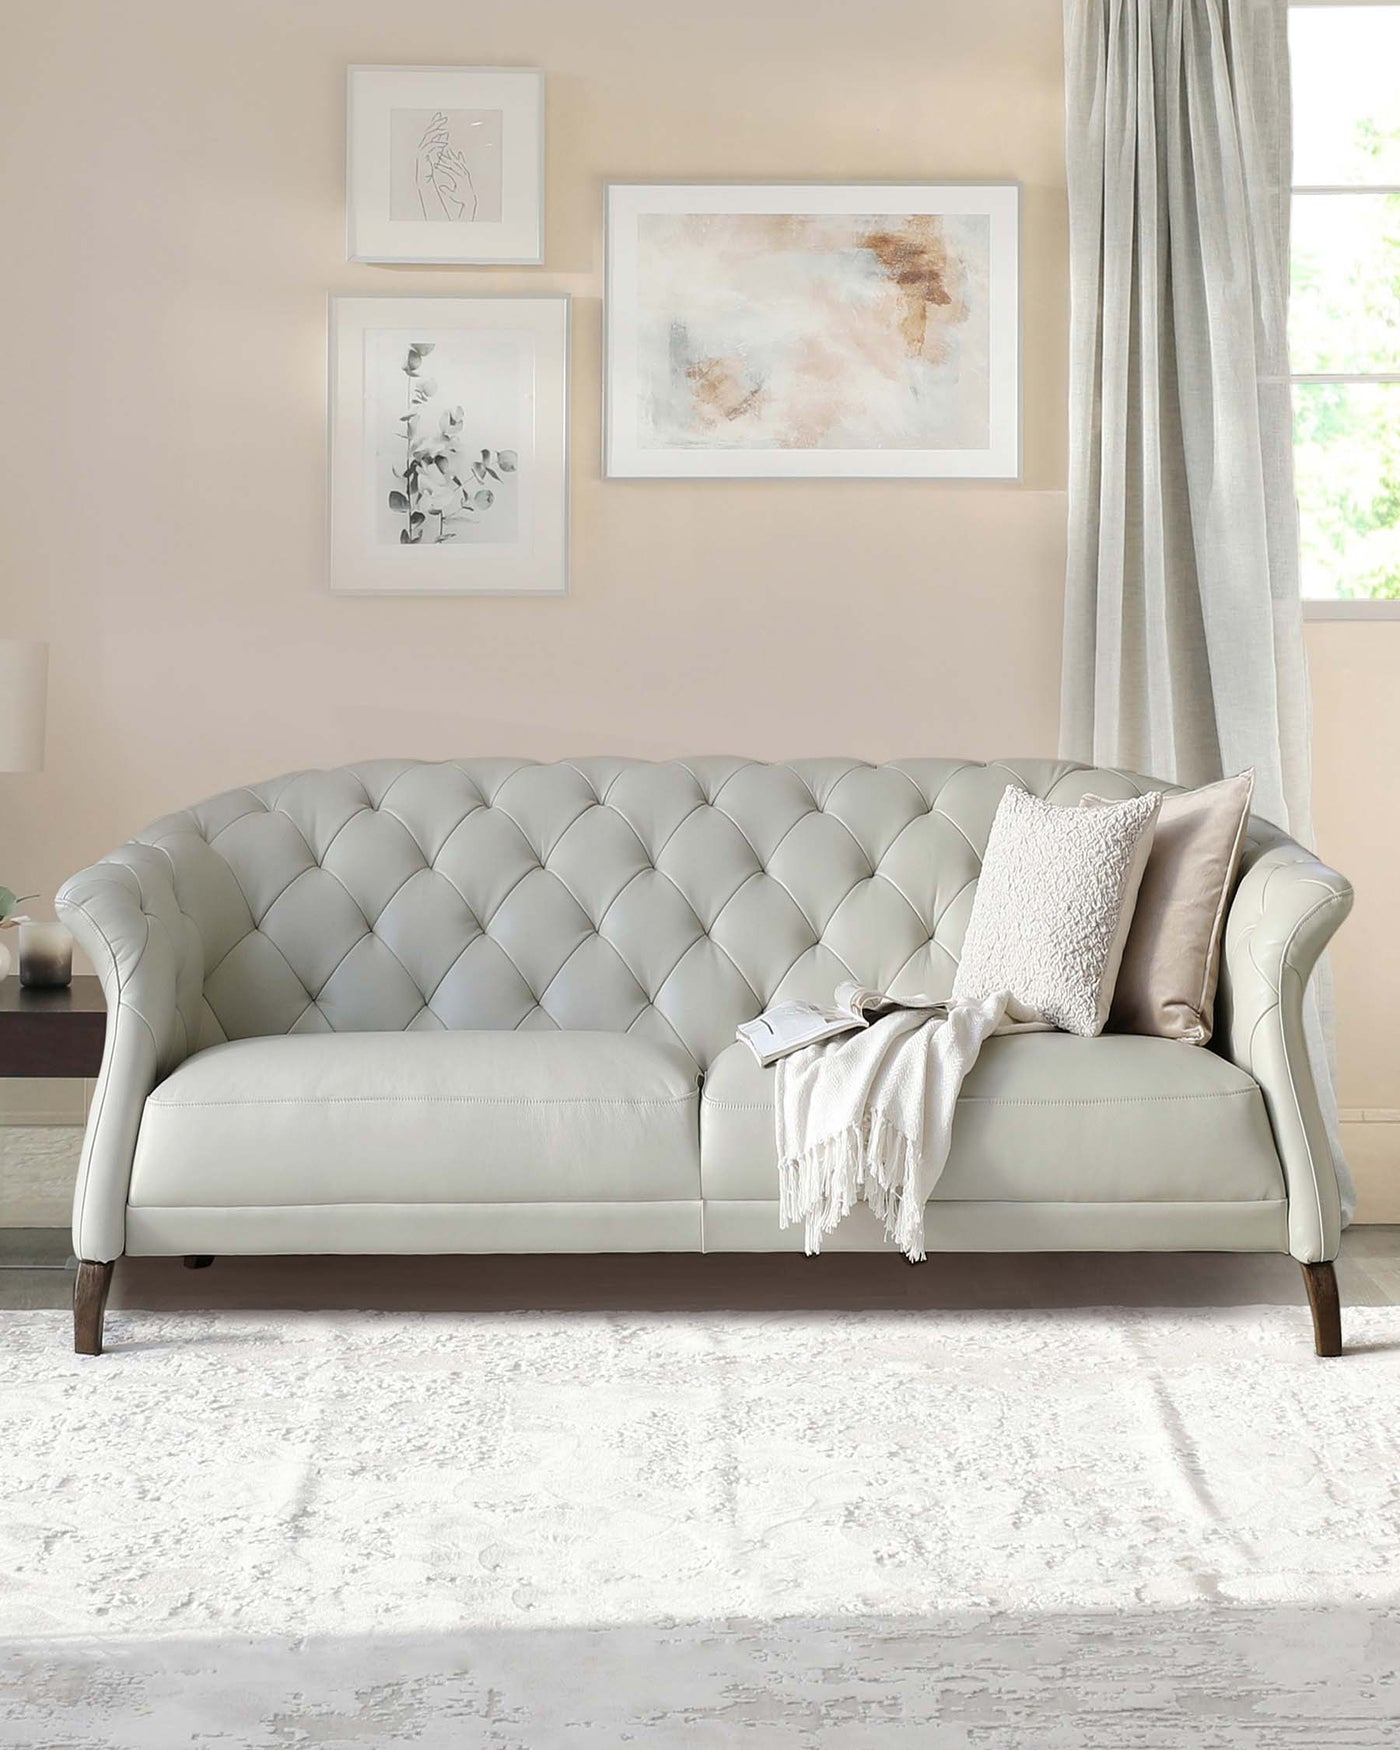 Elegant, tufted, light beige fabric sofa with scrolled arms and dark wooden legs, adorned with a pale pink pillow and a white fringed throw blanket, set in a softly lit room with a cream area rug.